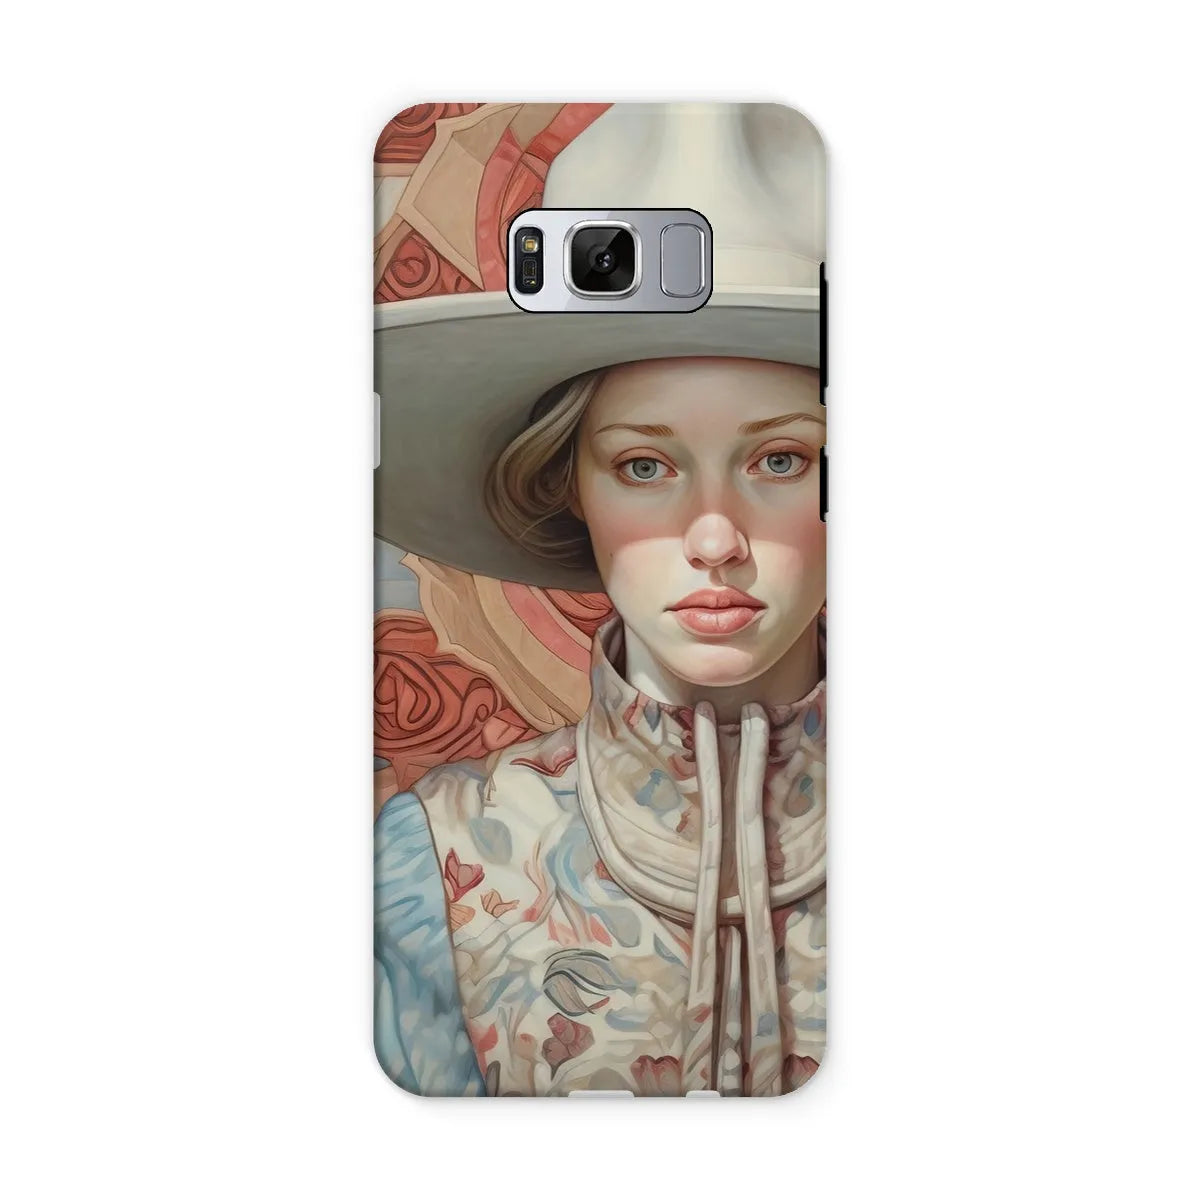 Lottie The Lesbian Cowgirl - Sapphic Art Phone Case - Samsung Galaxy S8 / Matte - Mobile Phone Cases - Aesthetic Art